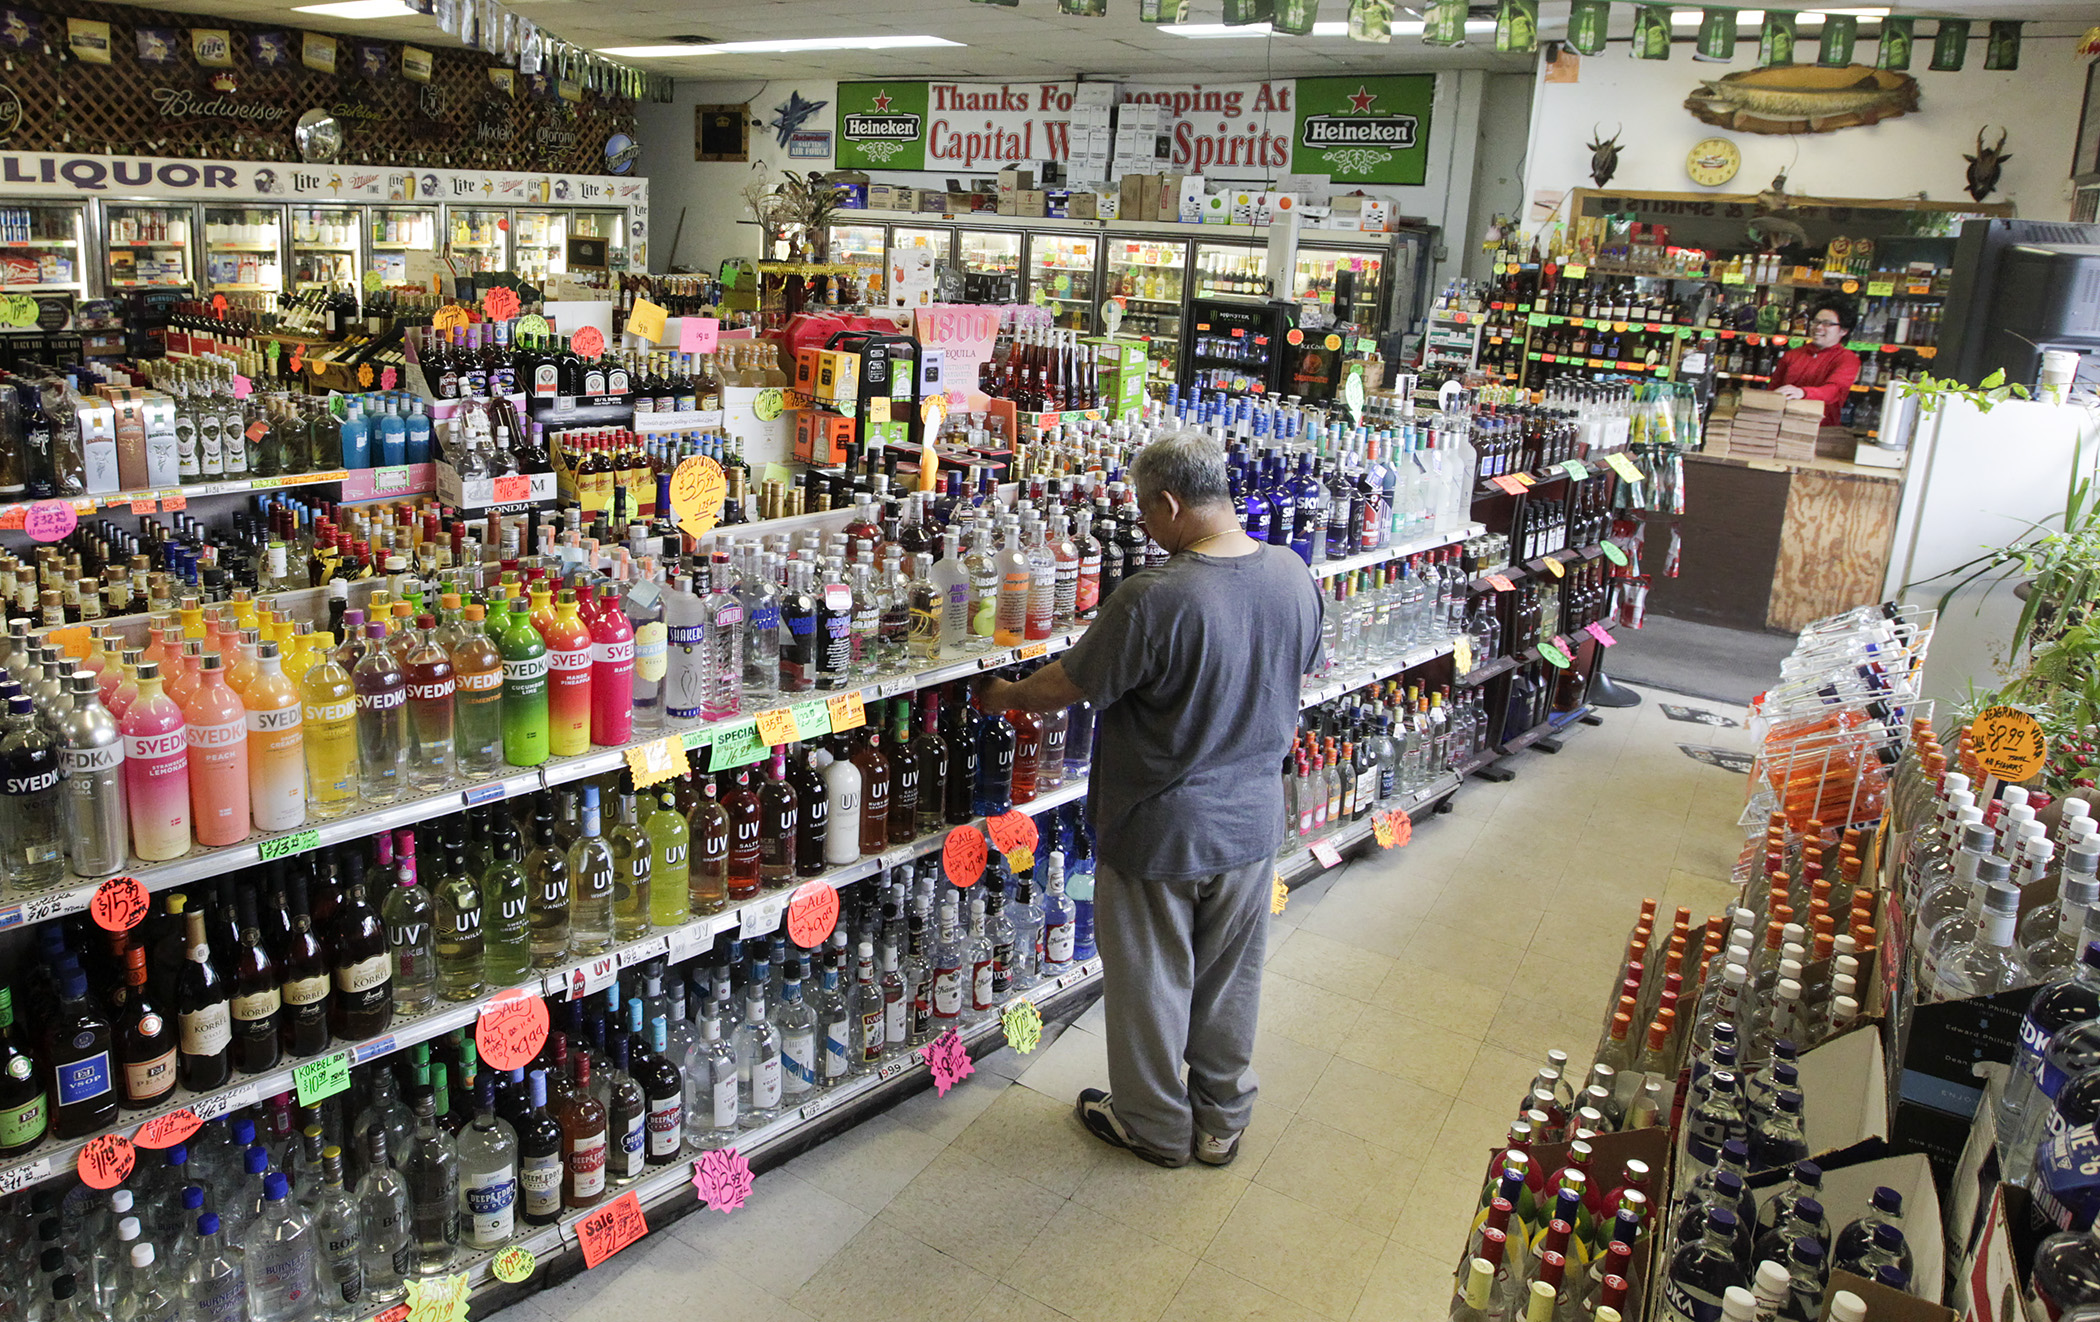 A shopper peruses the bottles on offer Thursday at Capital Wine and Spirit on Rice Street in St. Paul. Photo by Paul Battaglia